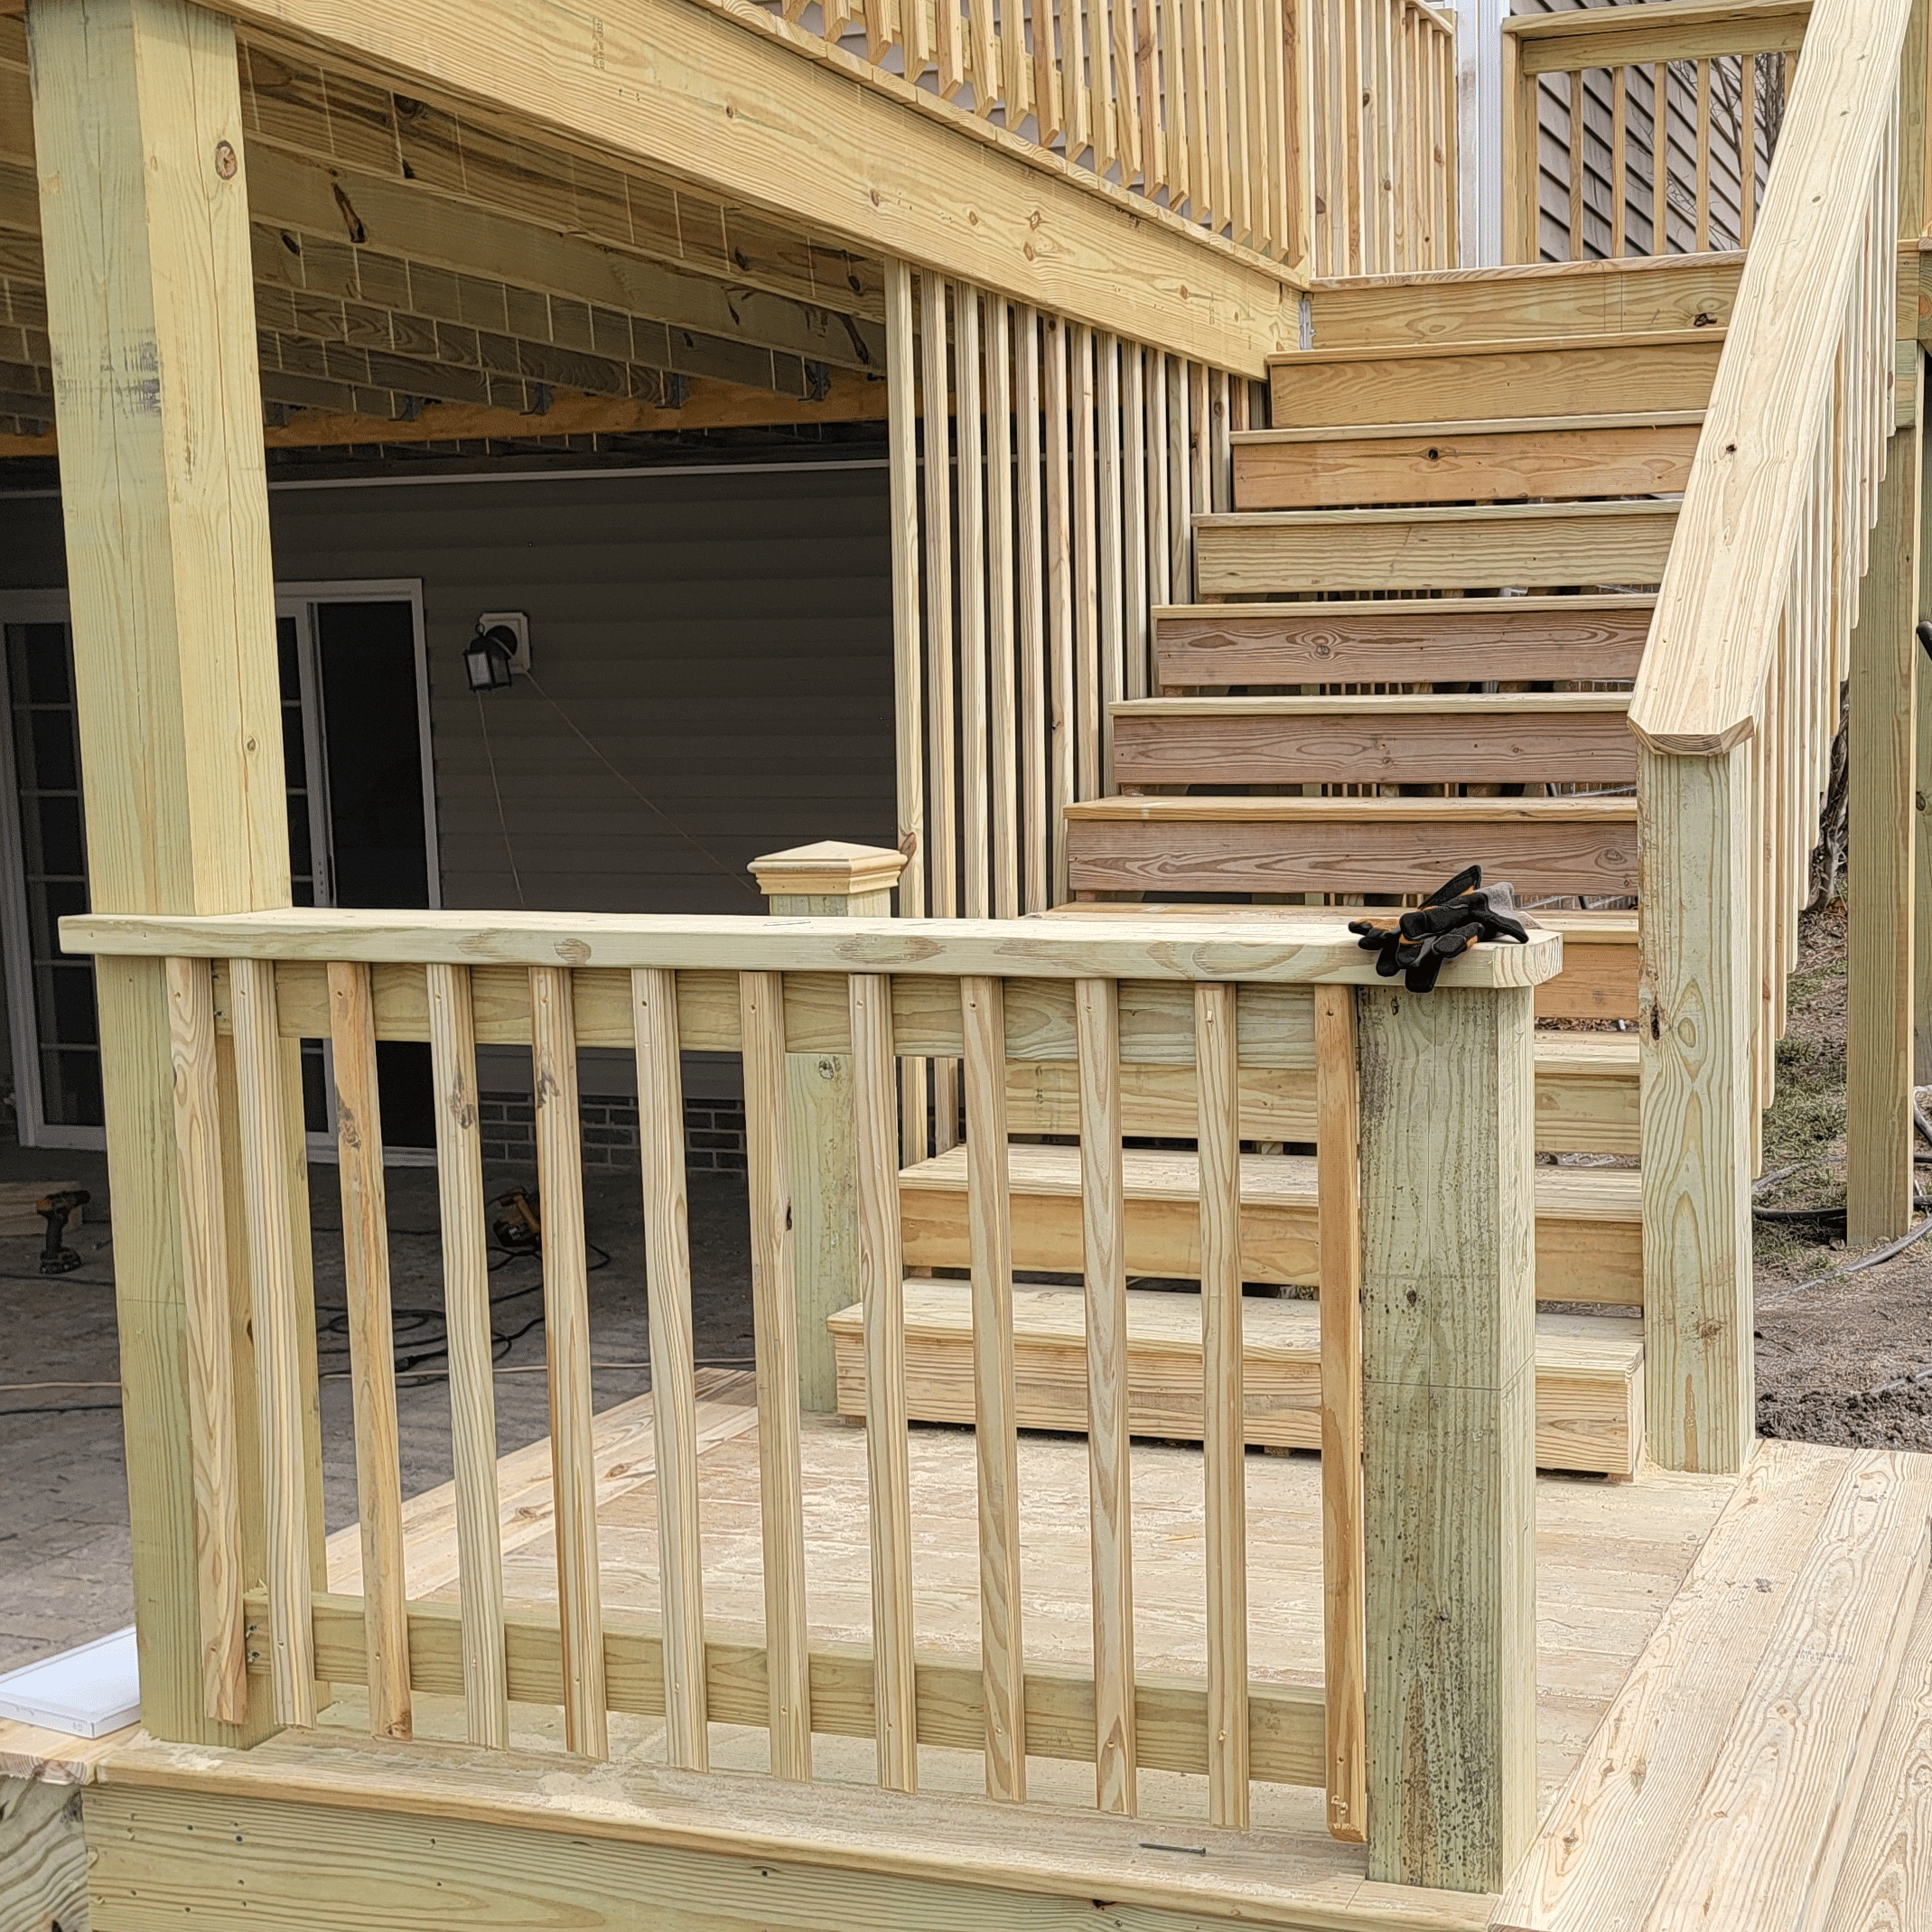 Newly installed deck with railings at a house in Raeford, NC.